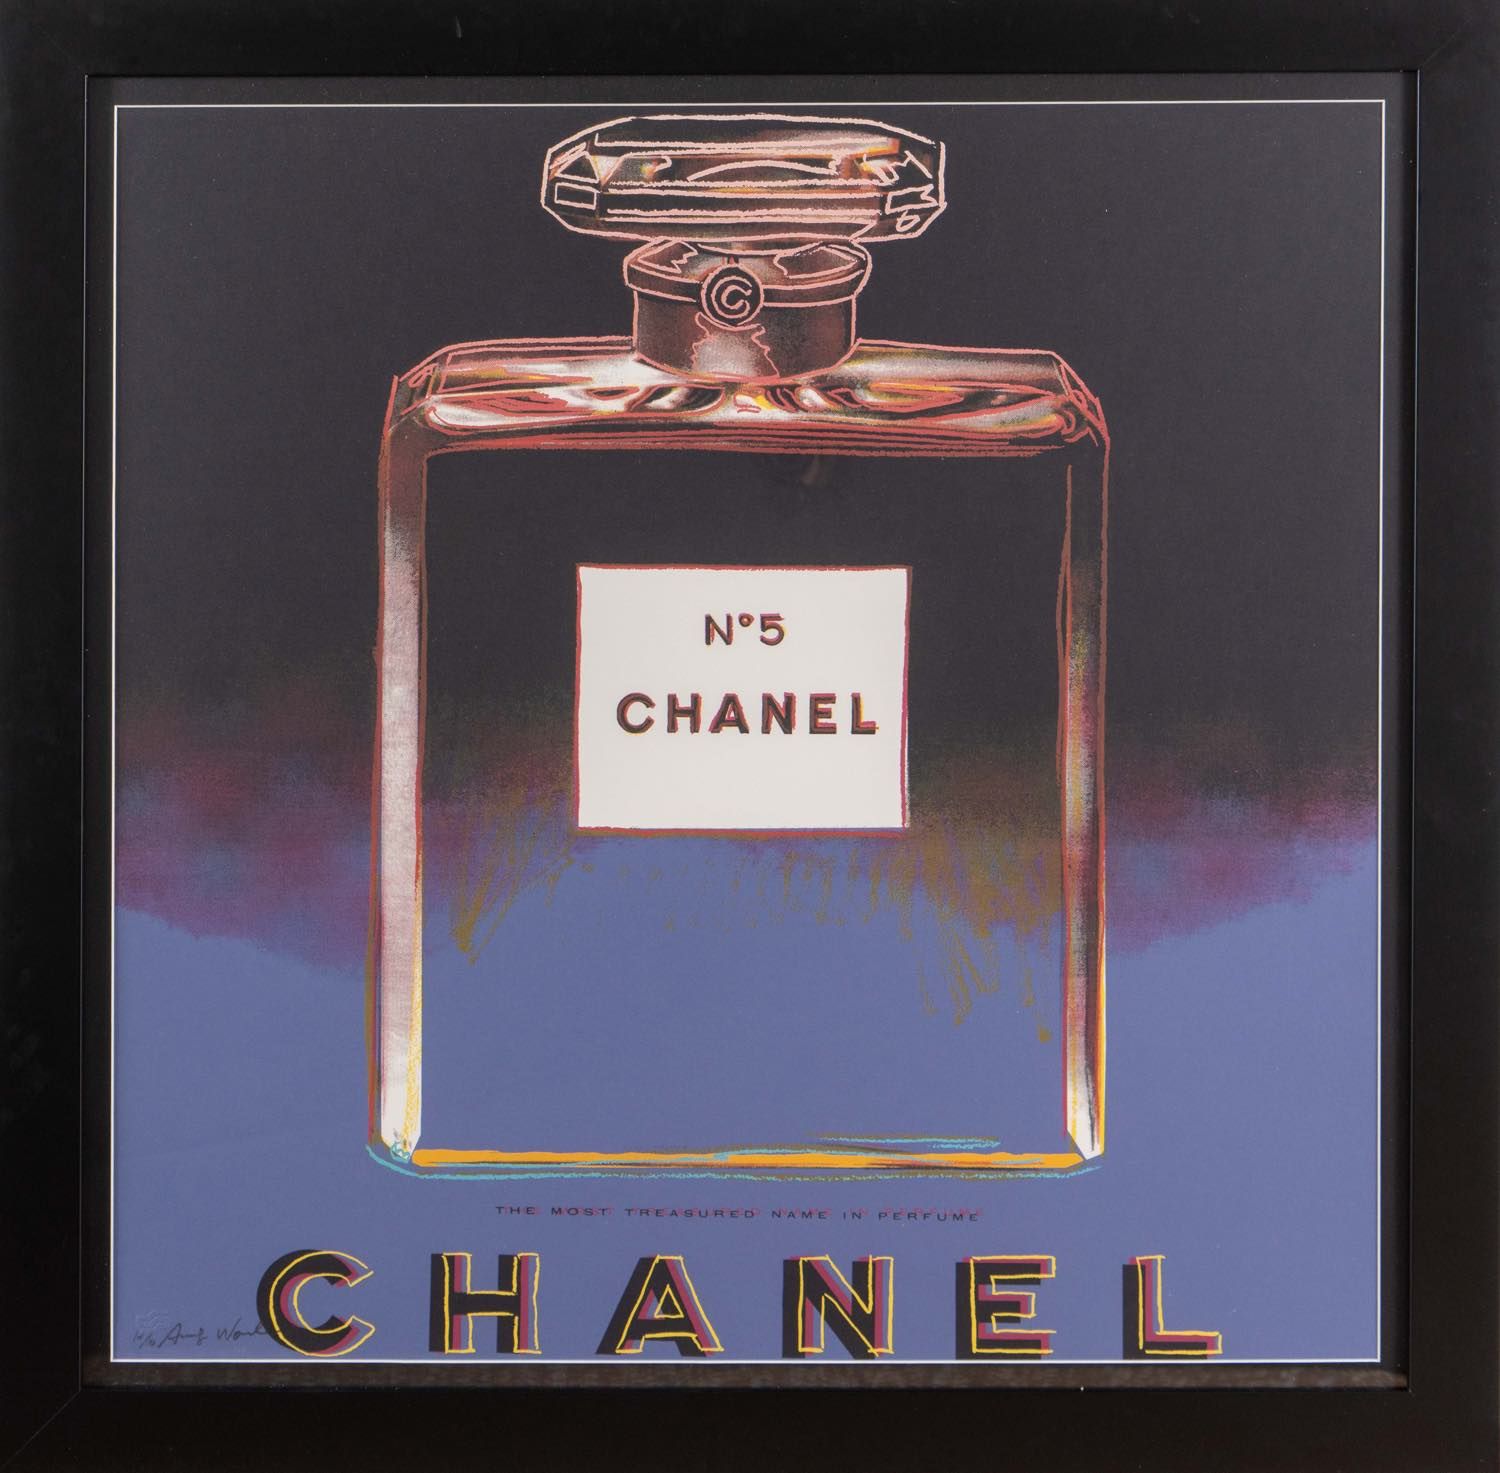 Andy Warhol (Pittsburgh 1928 - New York 1987), “Chanel”, 1985. Sérigraphie color&hellip;